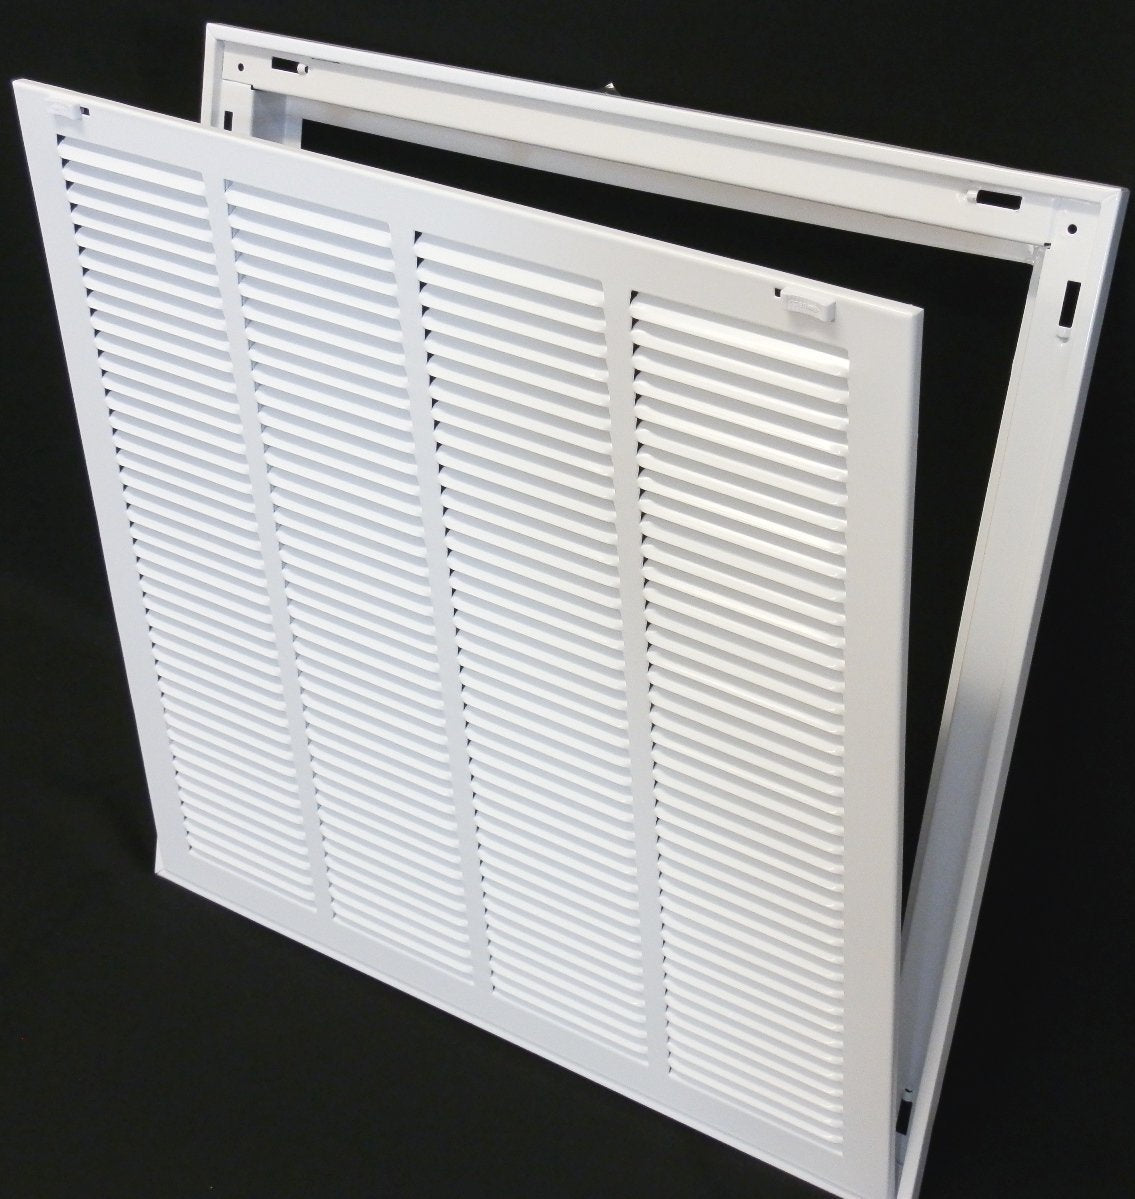 28&quot; X 22&quot; Steel Return Air Filter Grille for 1&quot; Filter - Removable Frame - [Outer Dimensions: 30 5/8&quot; X 24 5/8&quot;]